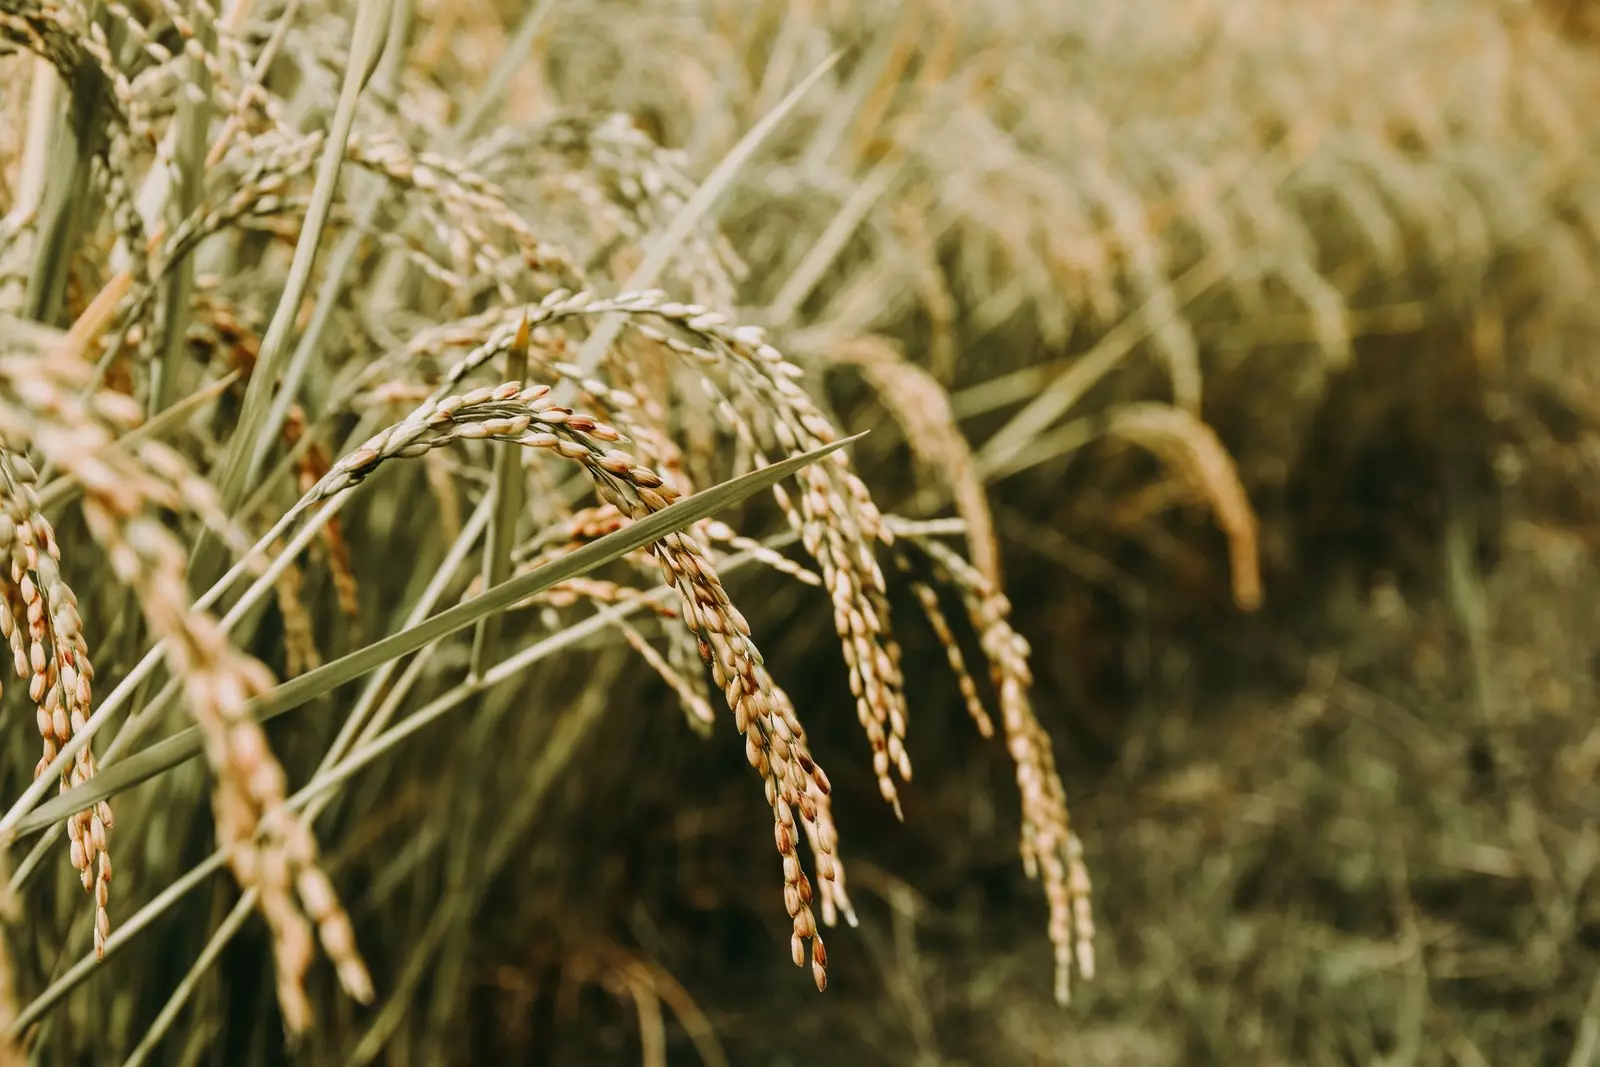 Extreme weather is driving food prices higher. These 5 crops are facing the biggest impacts